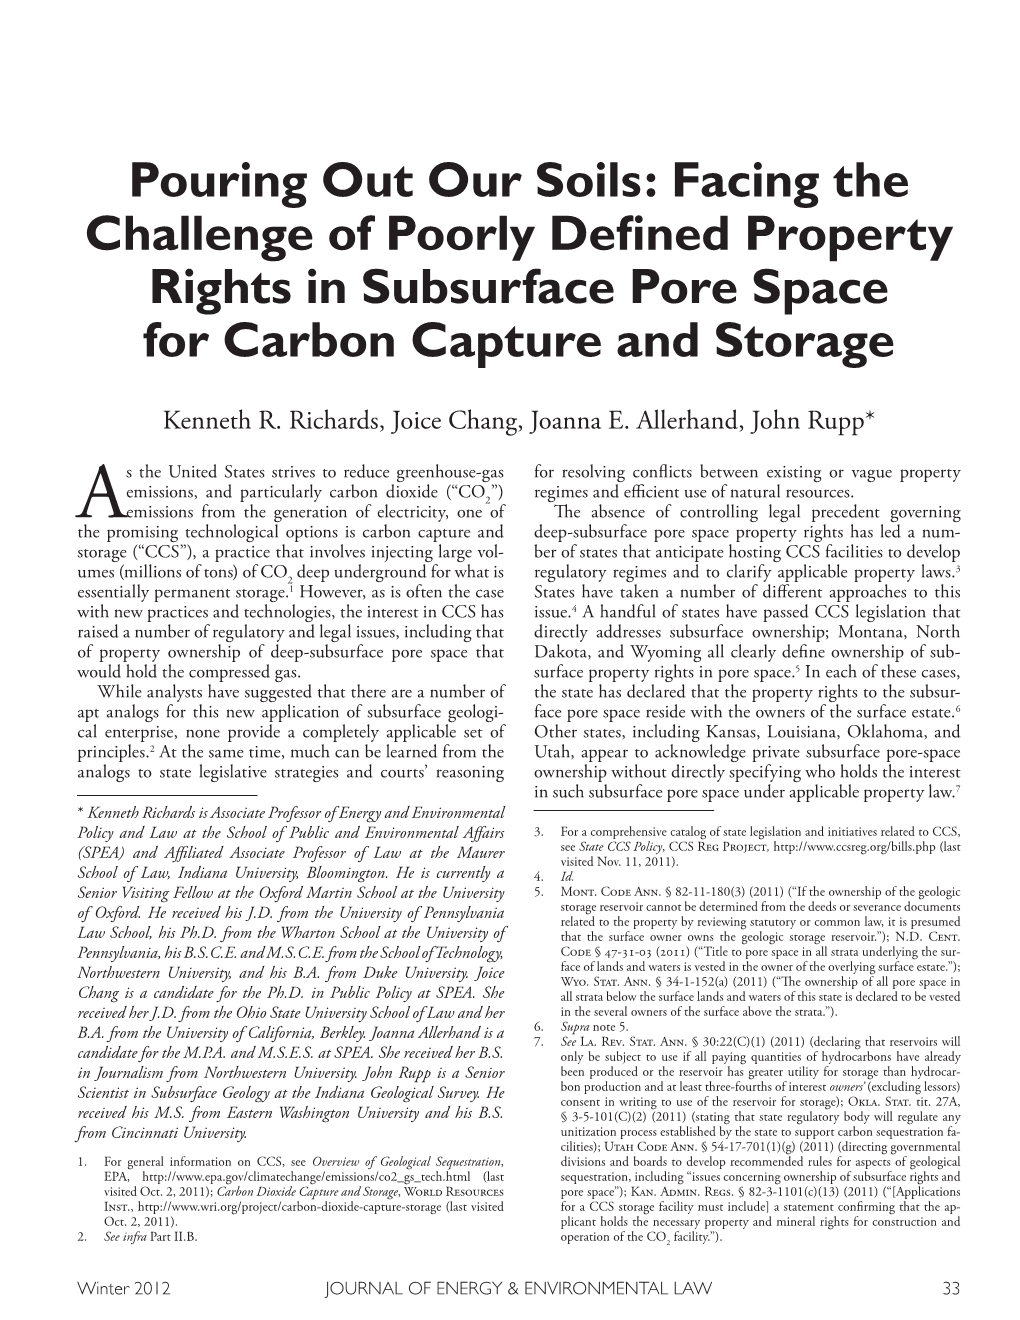 Pouring out Our Soils: Facing the Challenge of Poorly Deﬁned Property Rights in Subsurface Pore Space for Carbon Capture and Storage